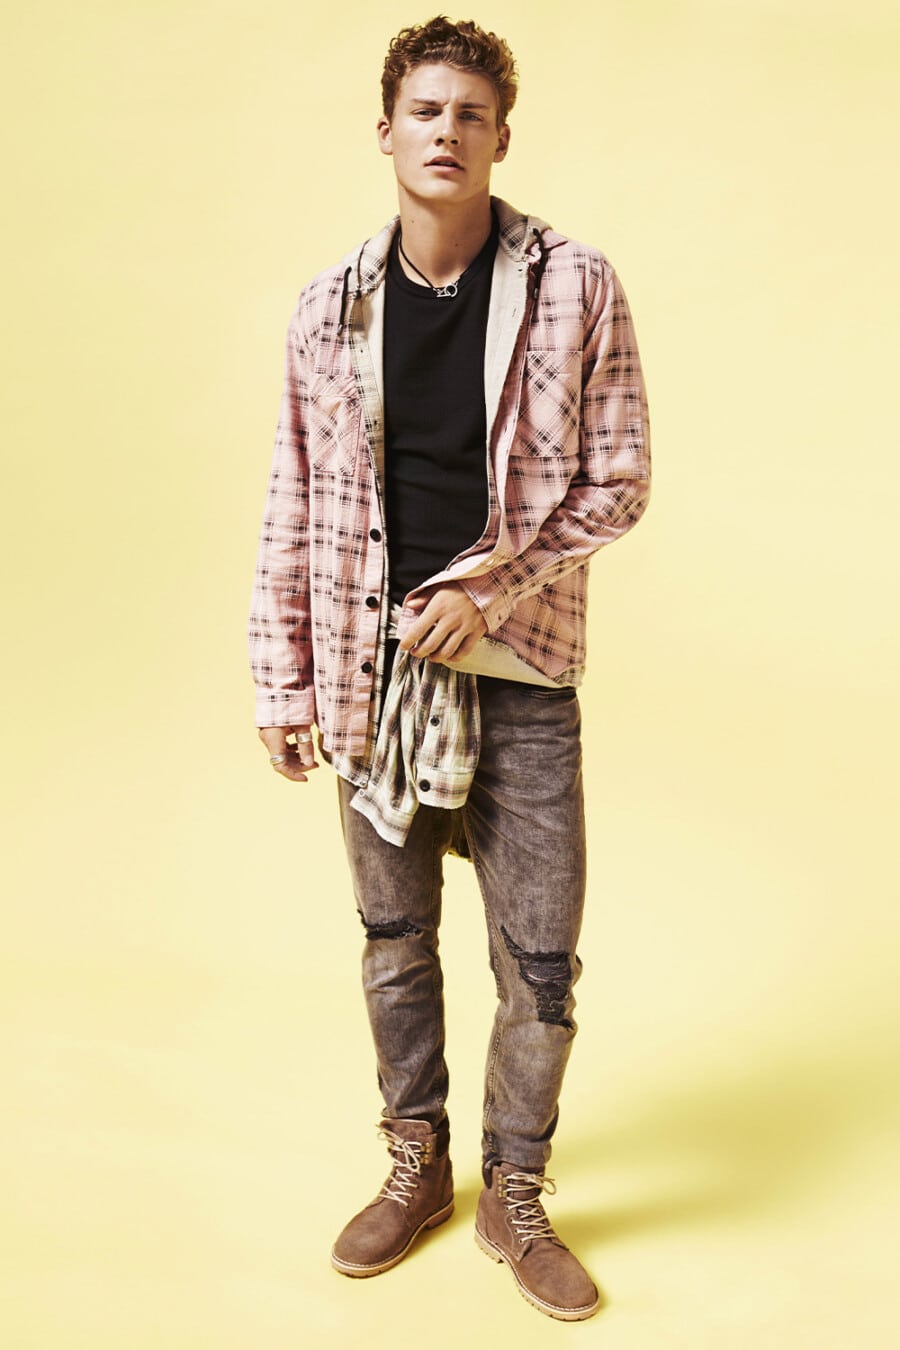 Men's ripped acid wash jeans, black T-shirt, pink check overshirt and brown suede worker boots grunge outfit